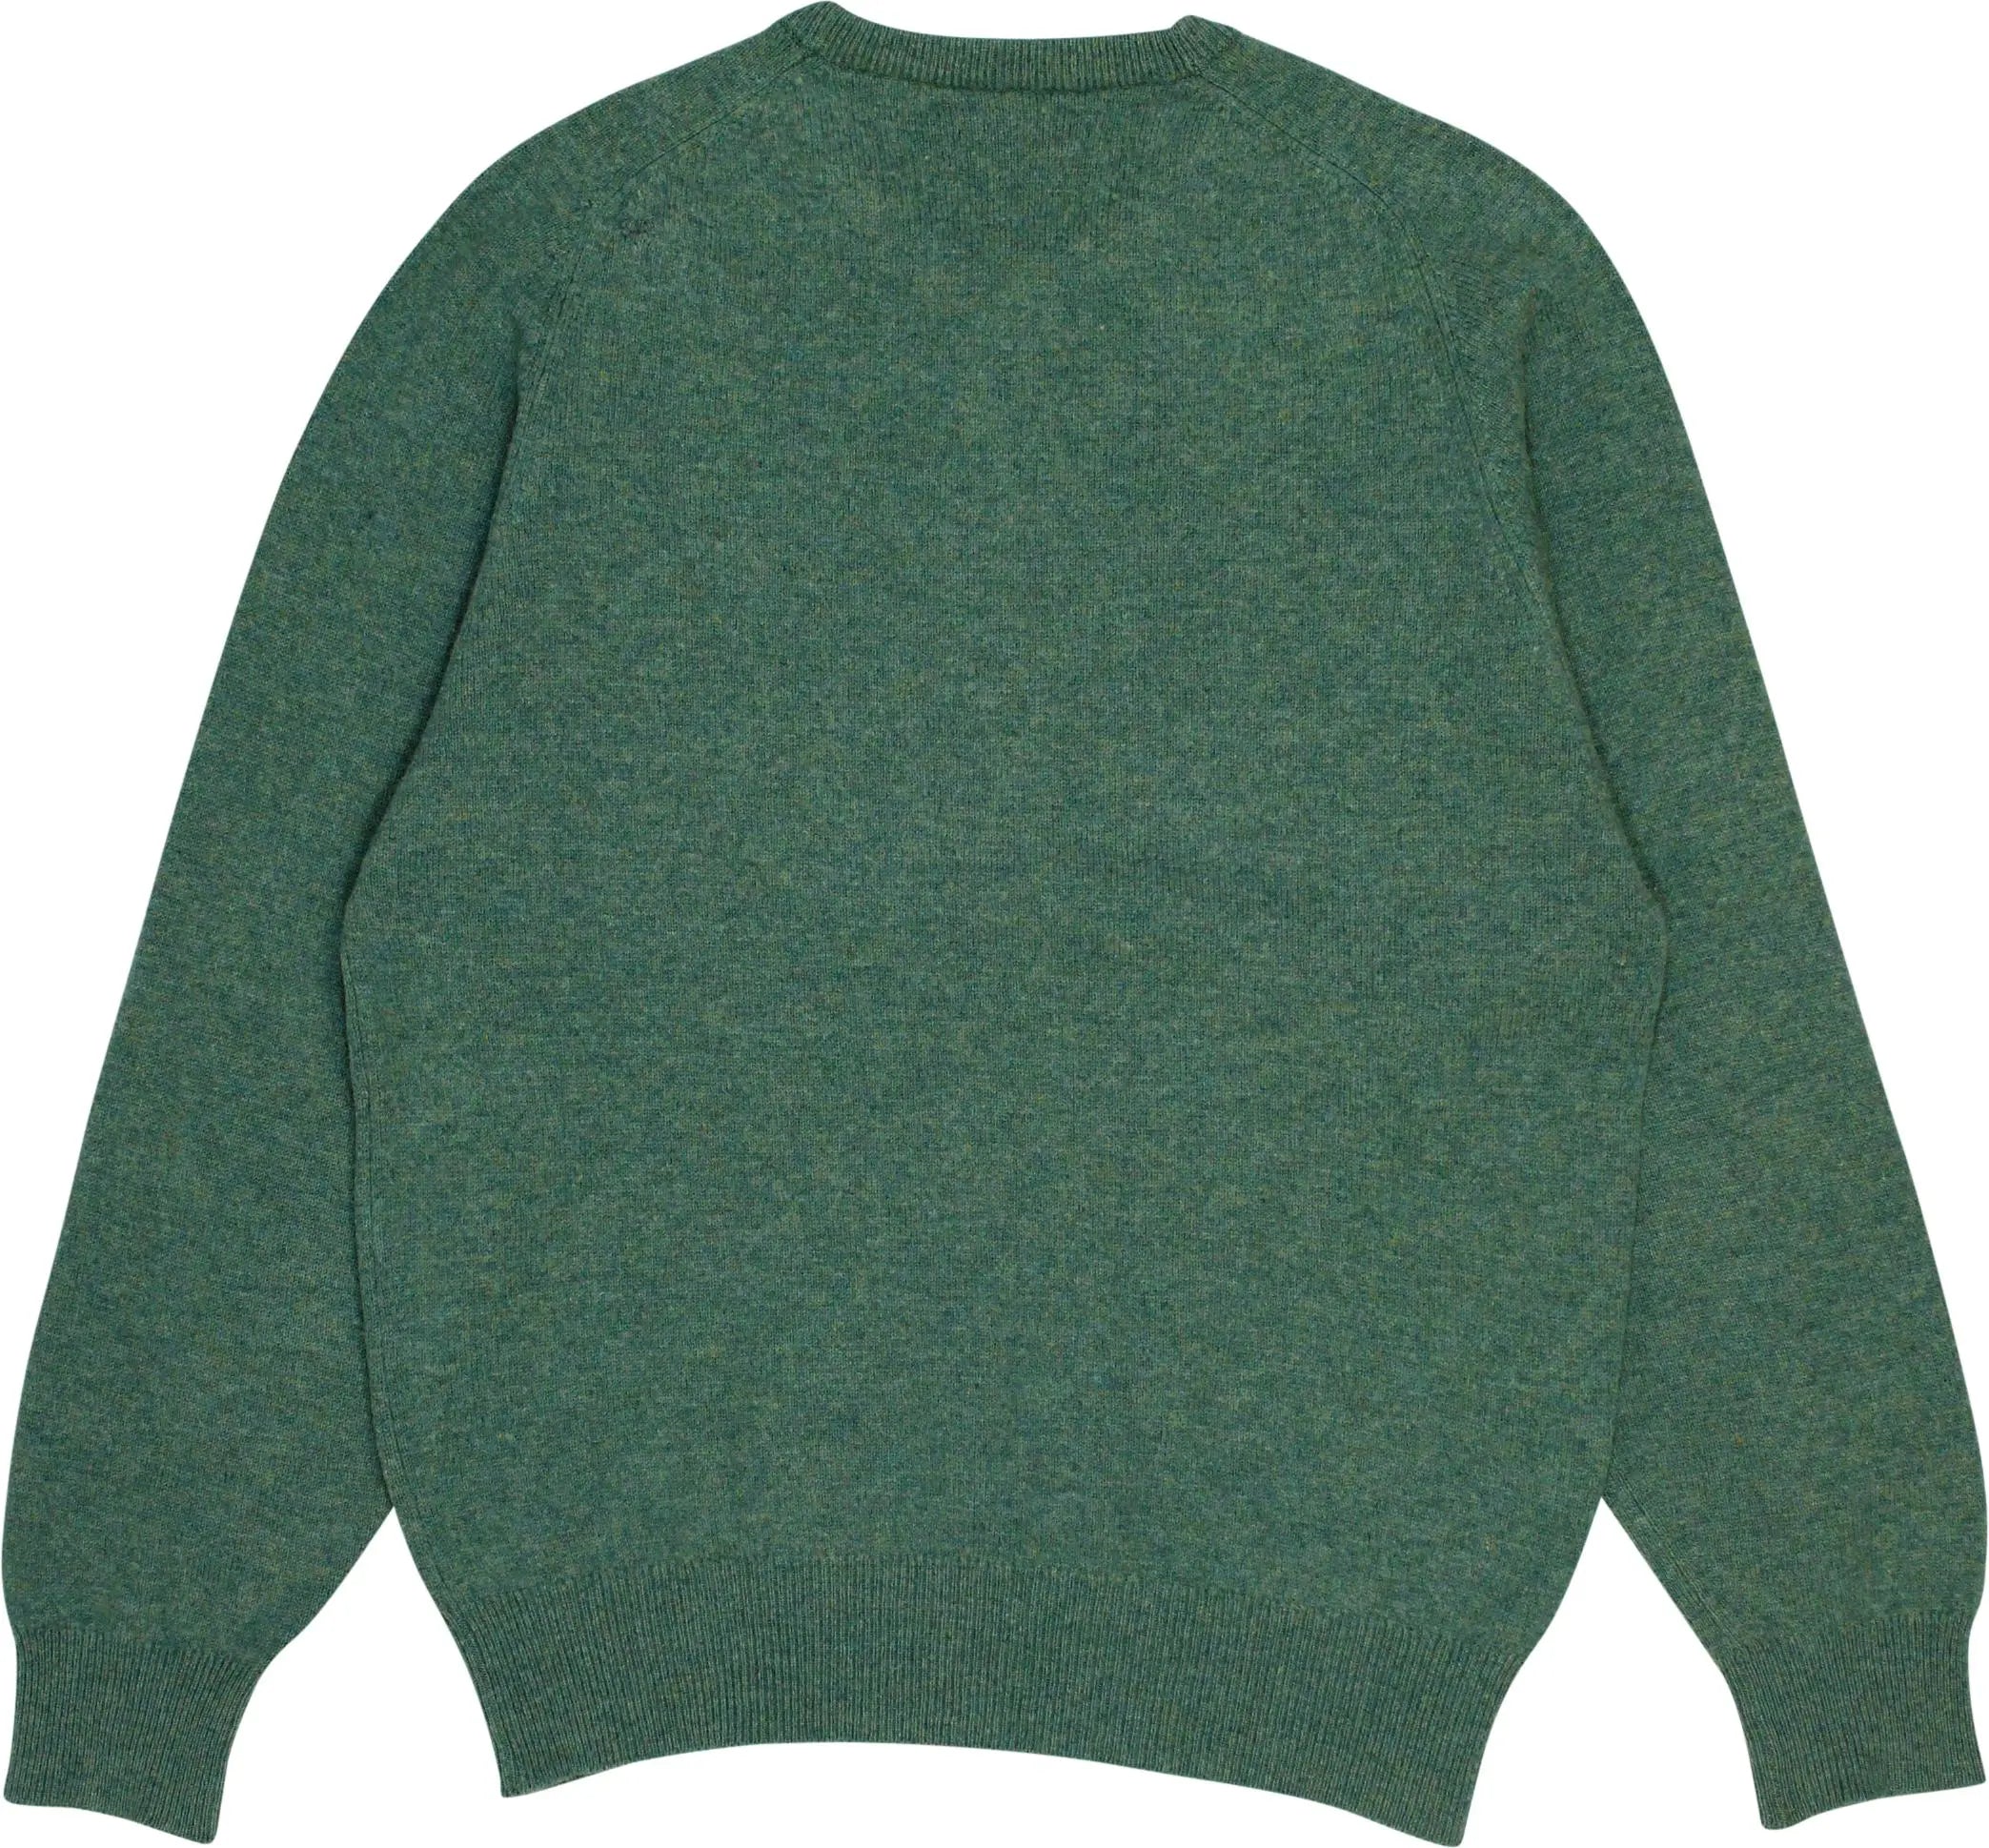 Alan Paine - Knitted Jumper- ThriftTale.com - Vintage and second handclothing